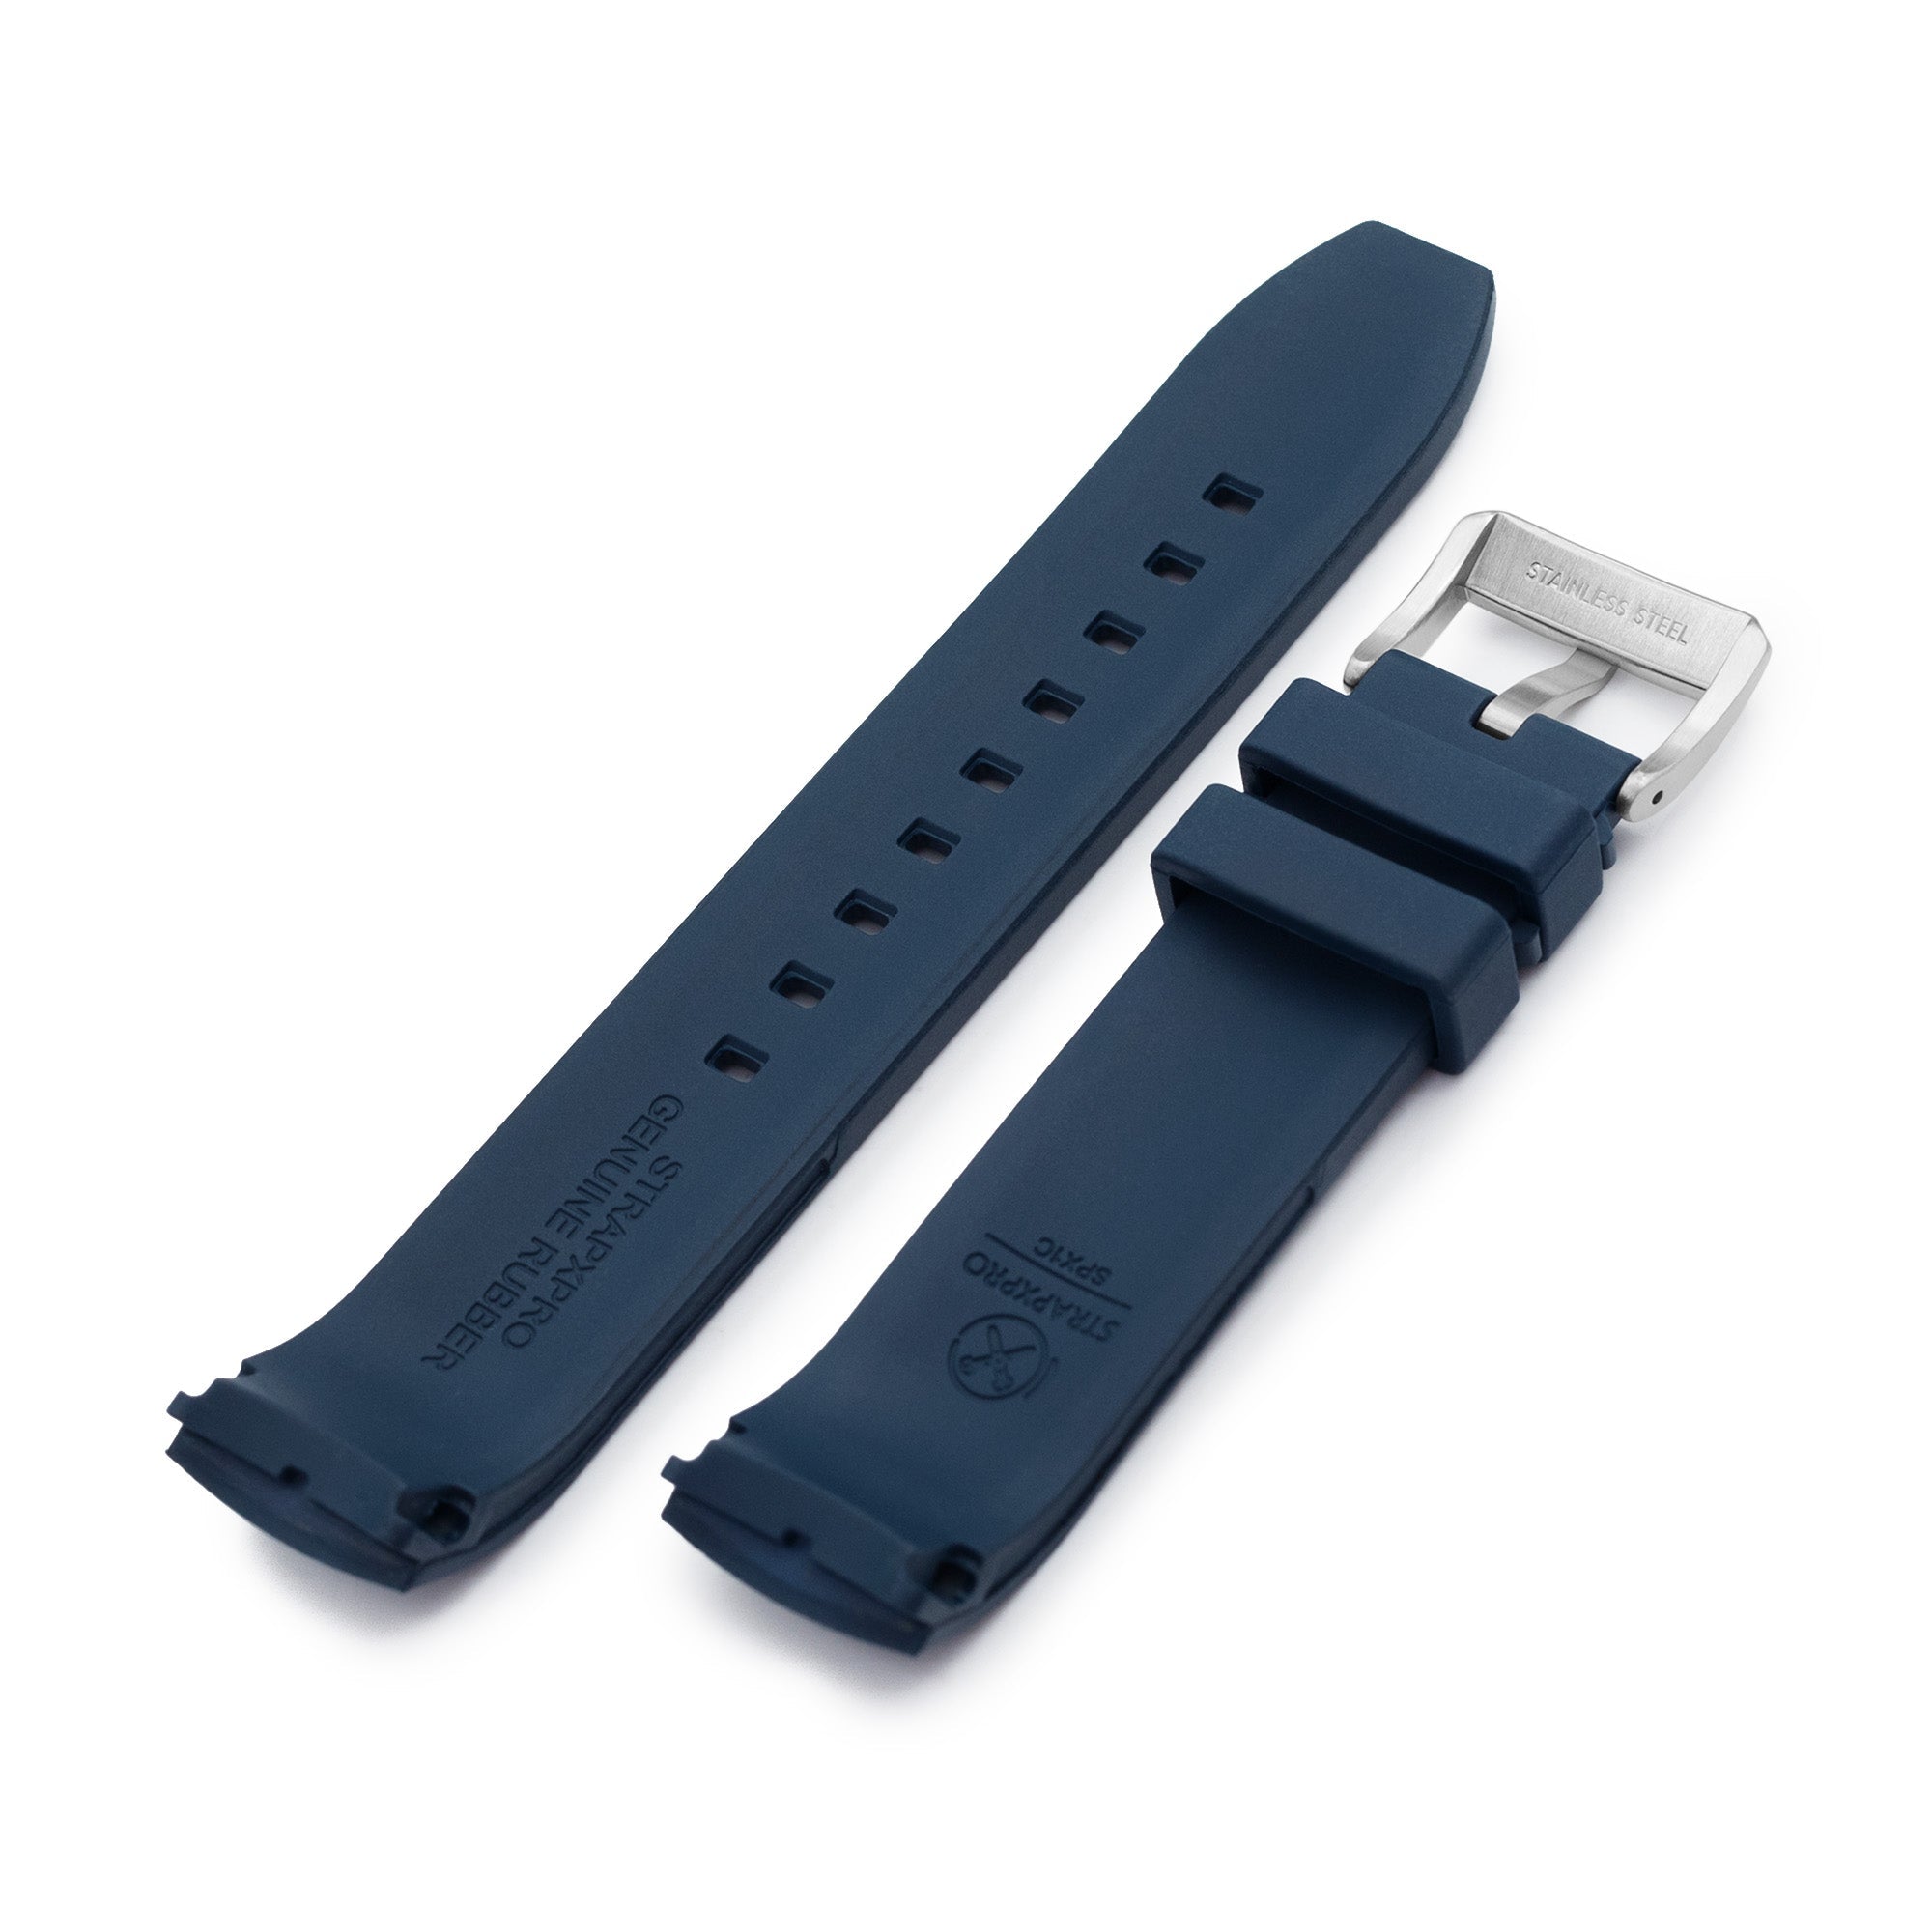 StrapXPro - SPX1C Rubber Strap For Seiko 62MAS (63Mas) SPB/SBDC Series, Navy Blue Strapcode Watch Bands